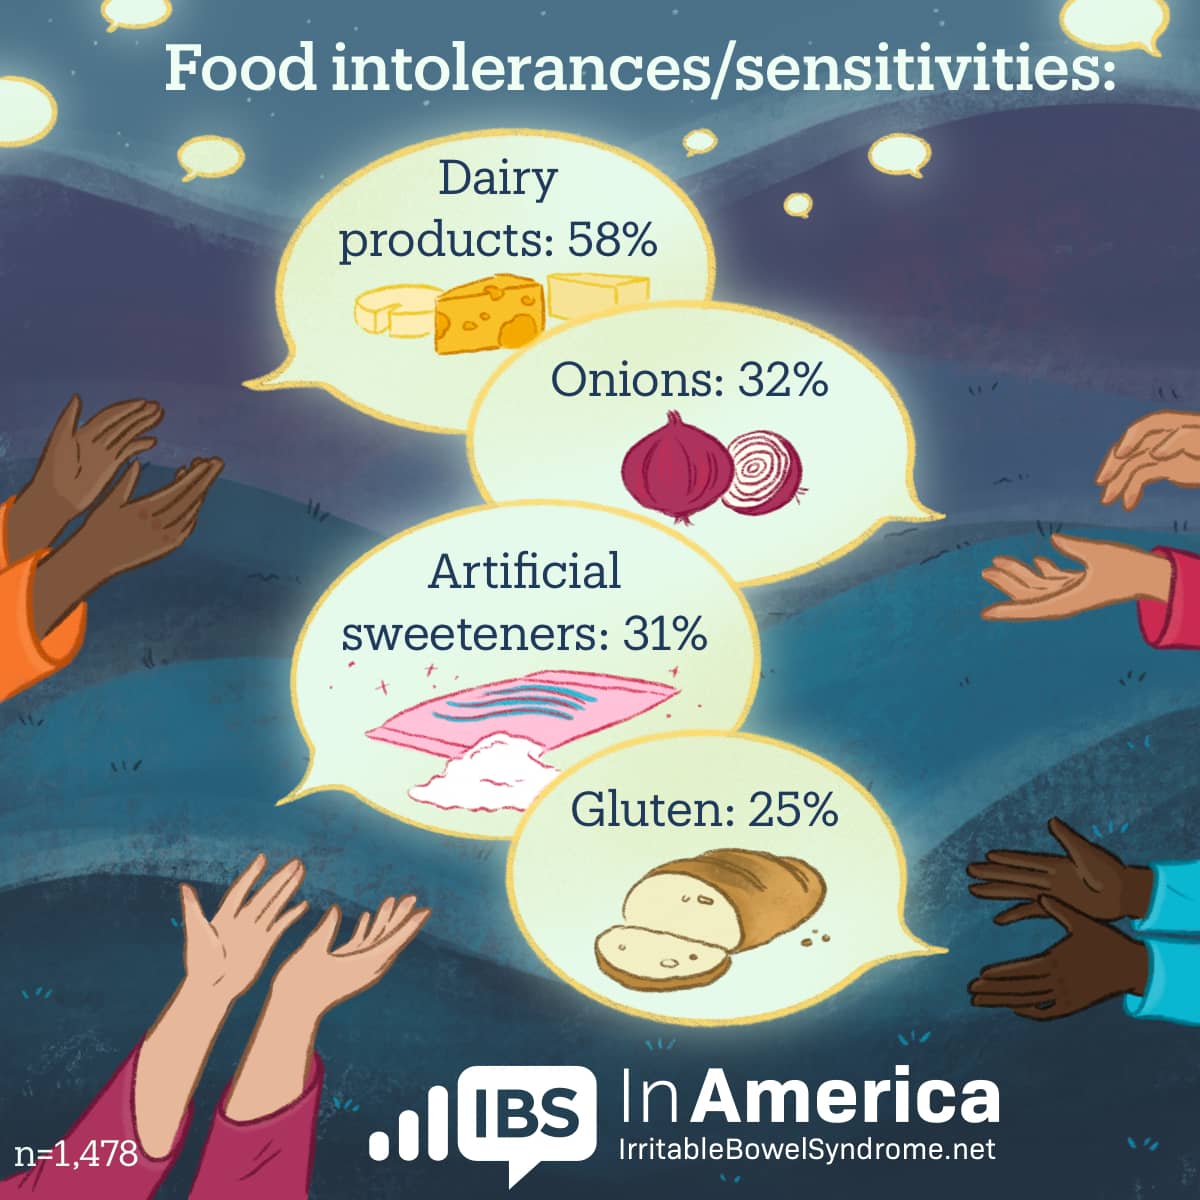 Hands raise up speech bubbles with food intolerances, including dairy products, onions, artificial sweeteners, and gluten inside each bubble.